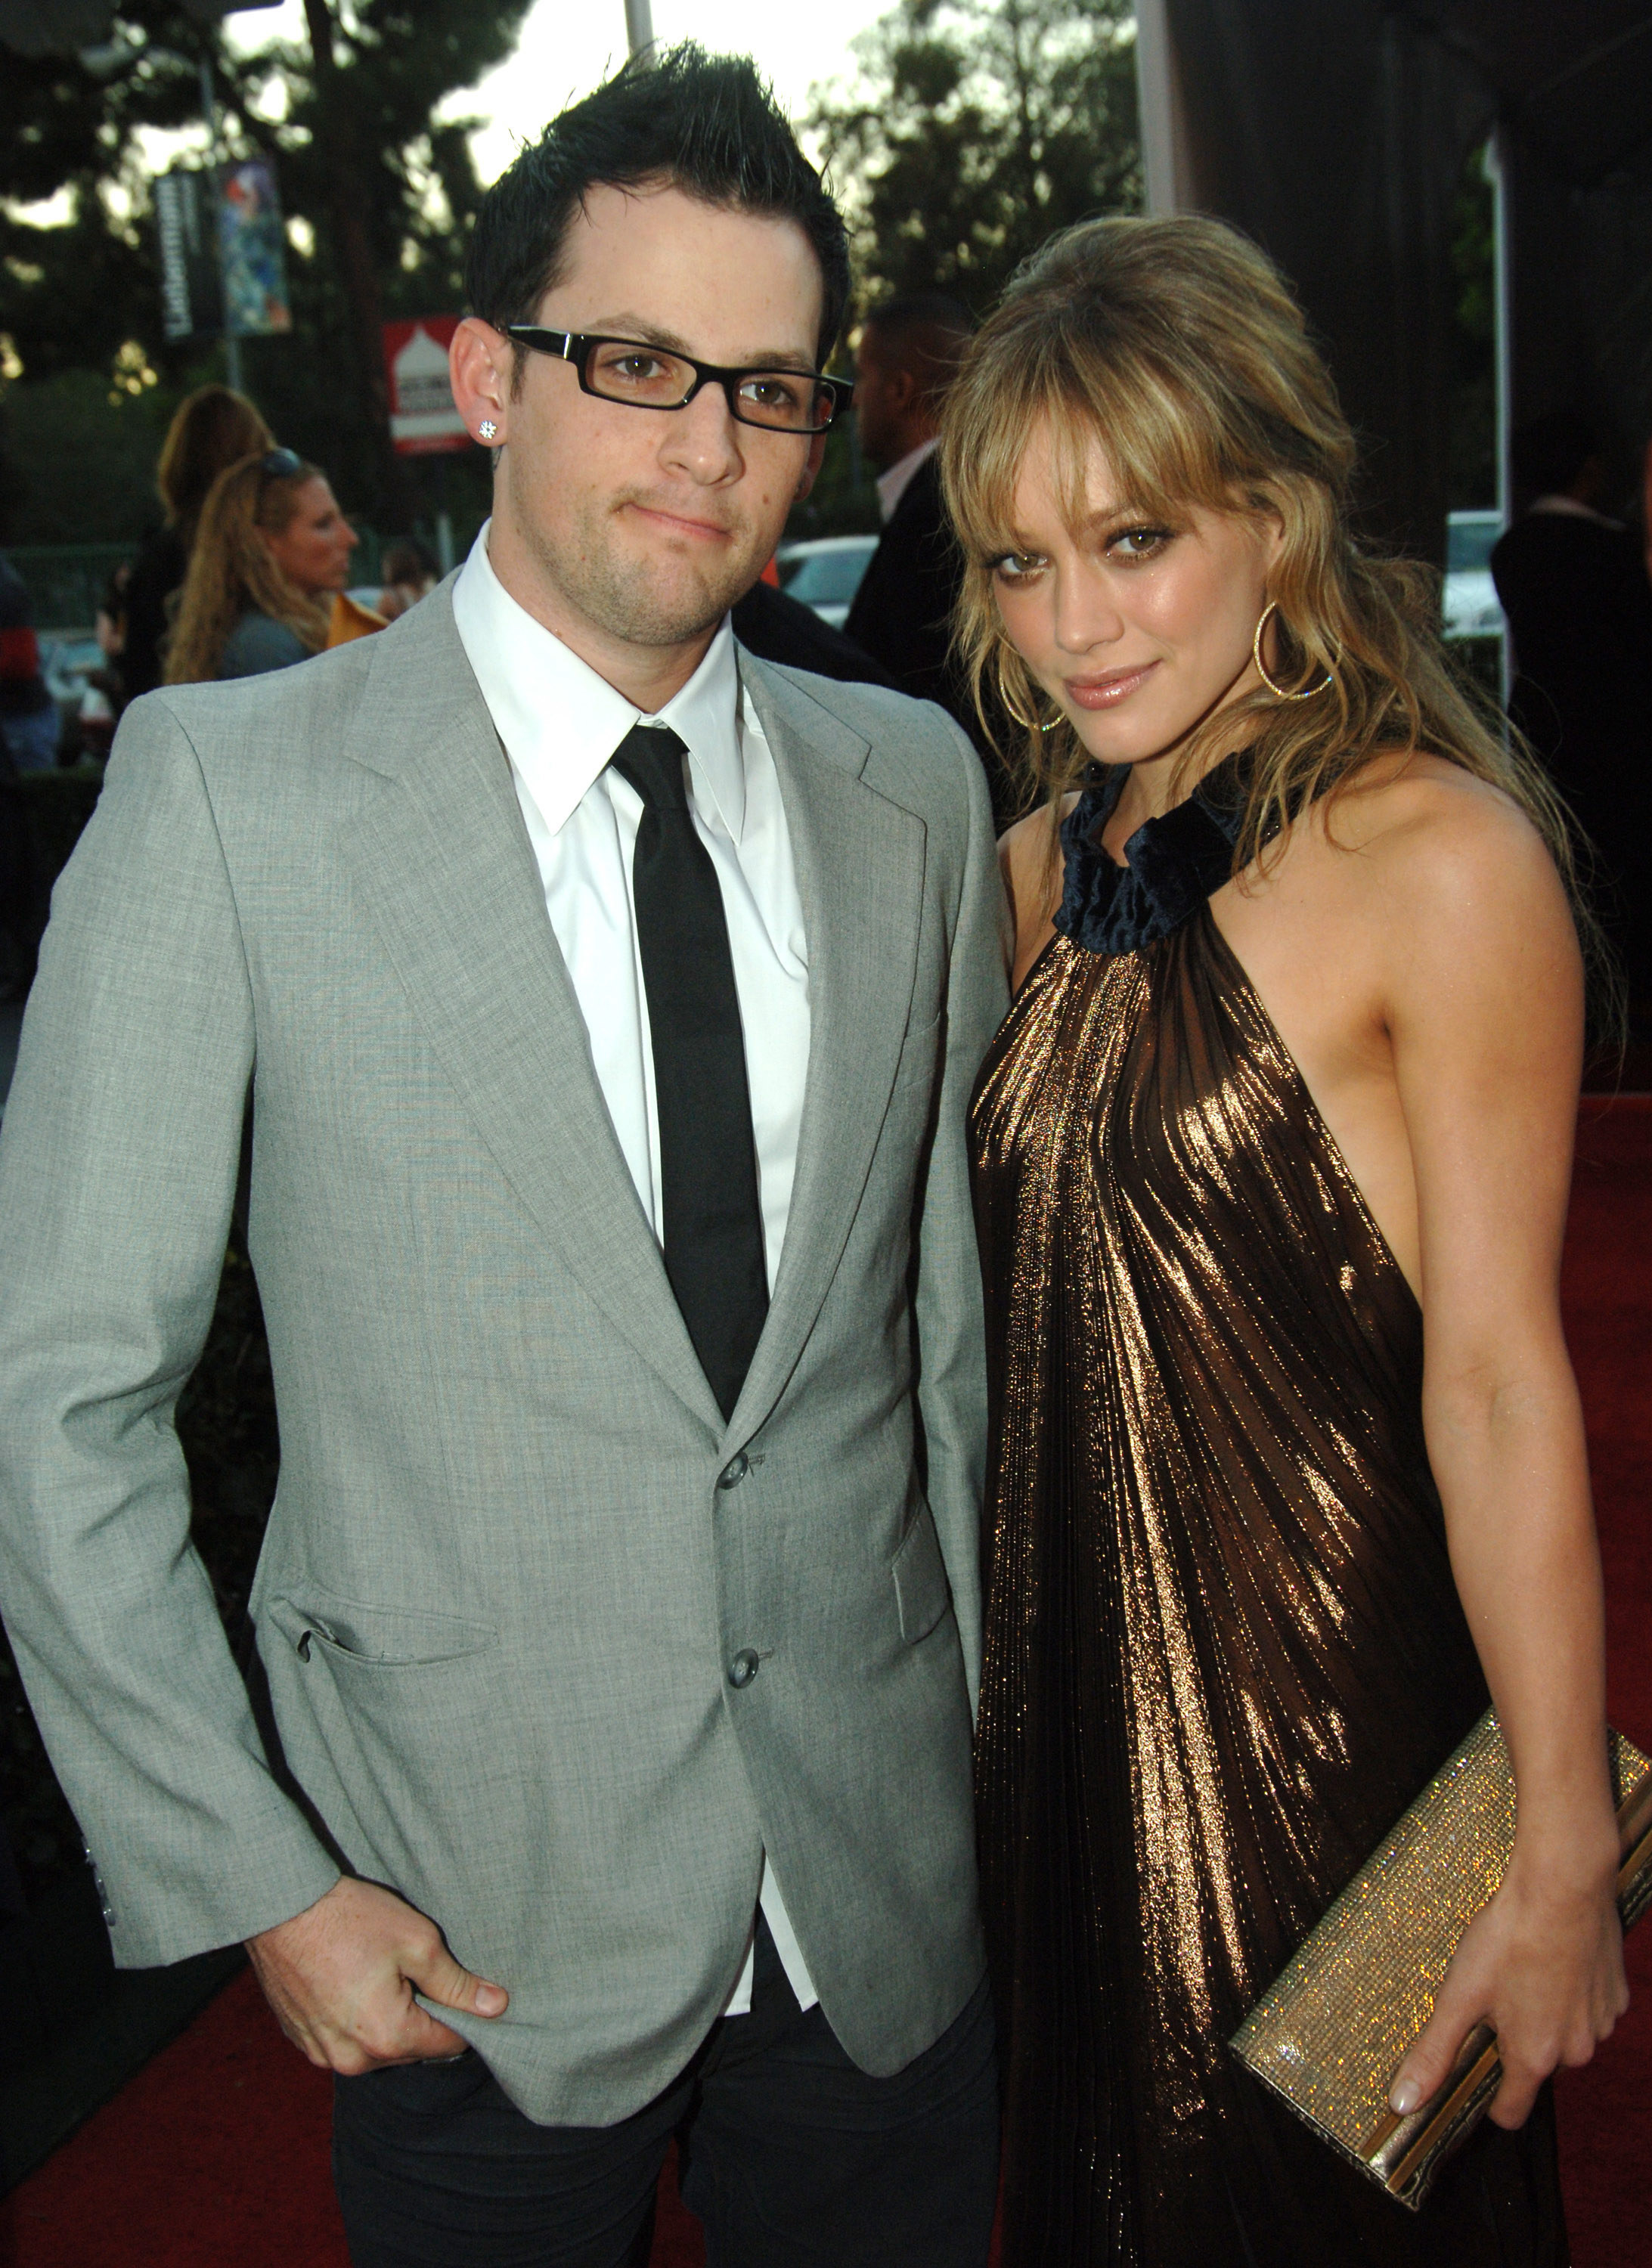 Joel Madden in a gray-and-black suit and Hilary Duff in a bronze dress at the 33rd annual American Music Awards